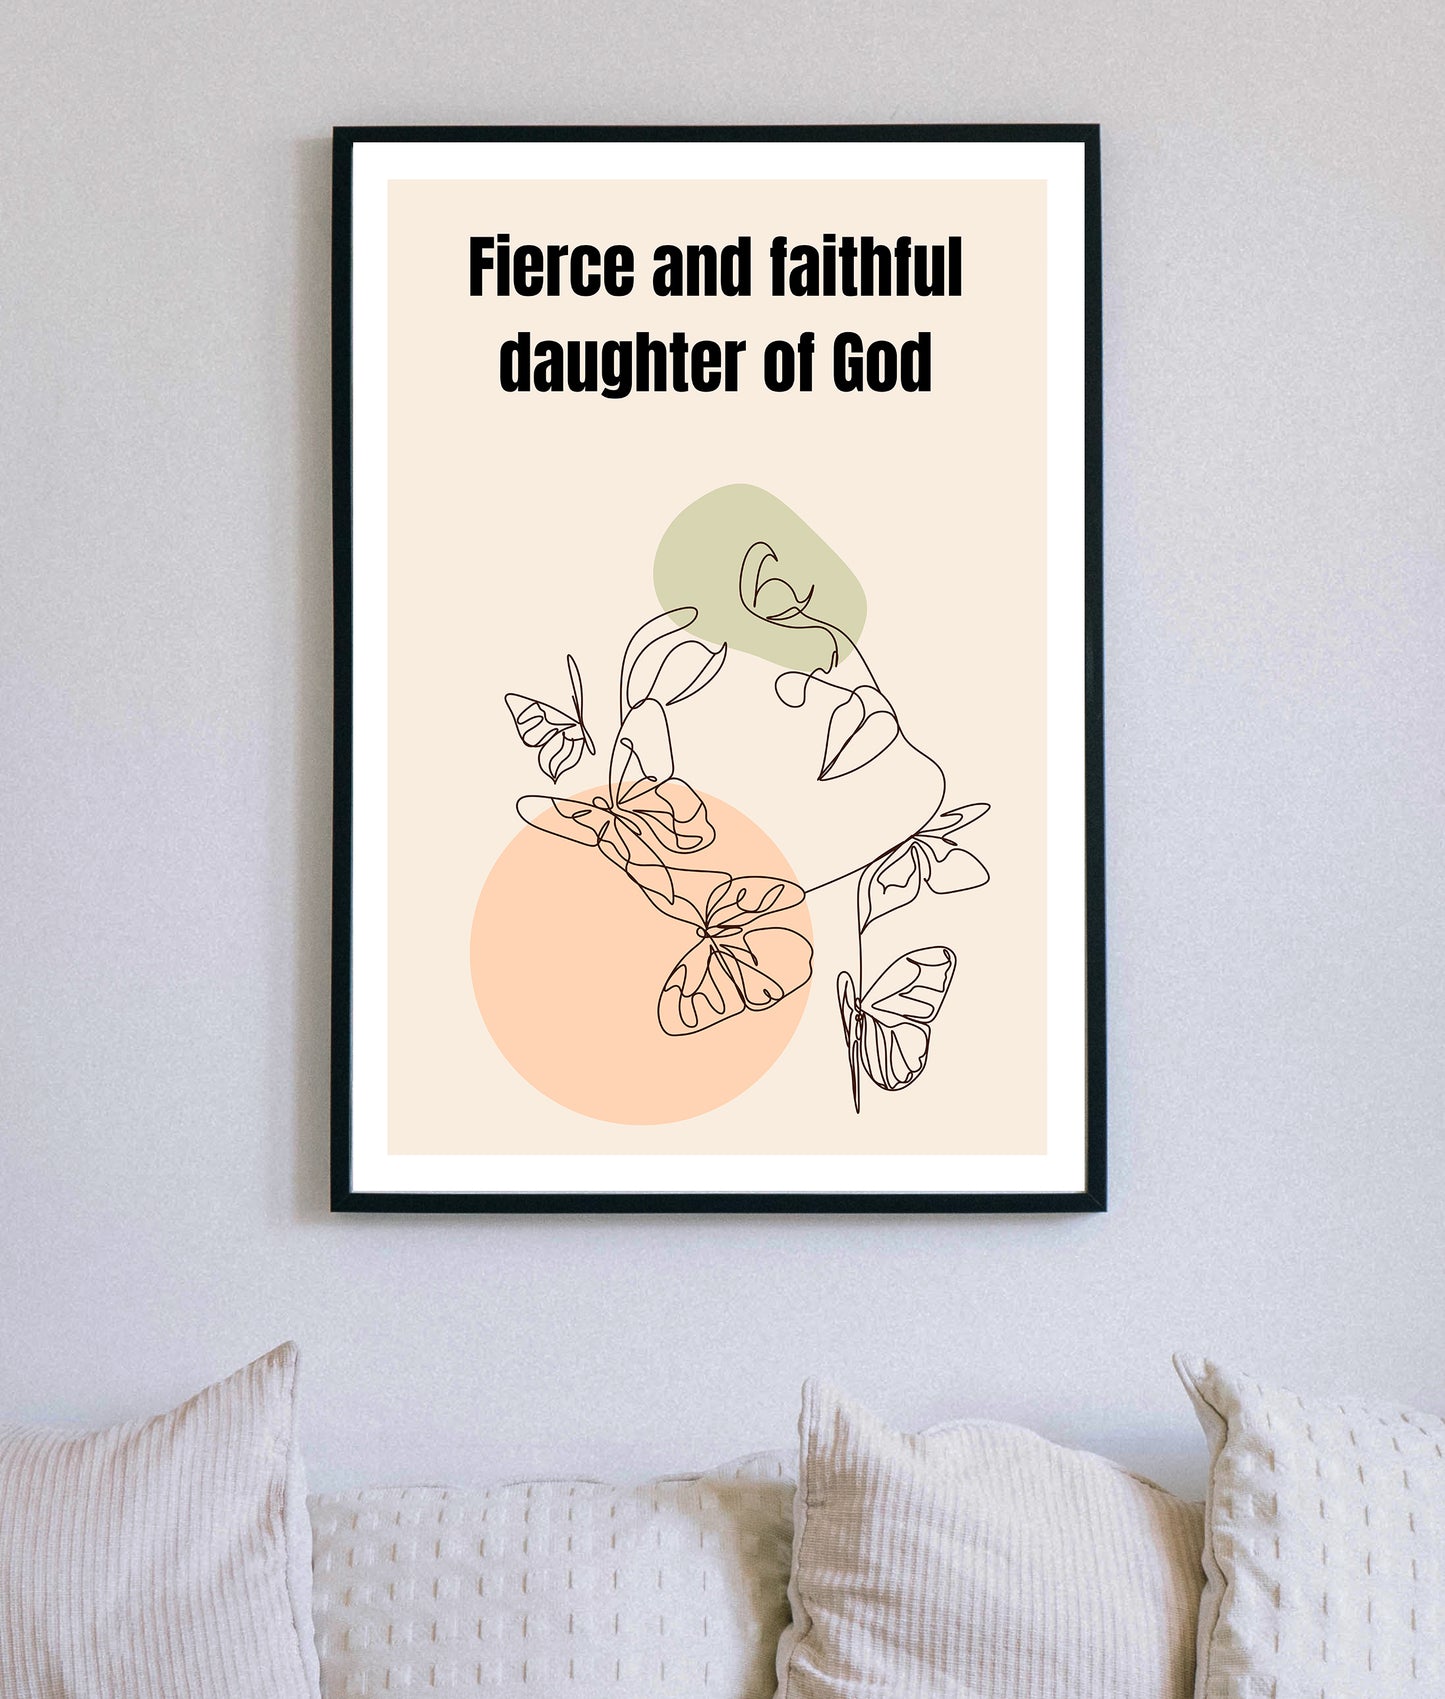 Fierce and Faithful Christian Quote, Scripture, Bible Verse Poster Wall Art